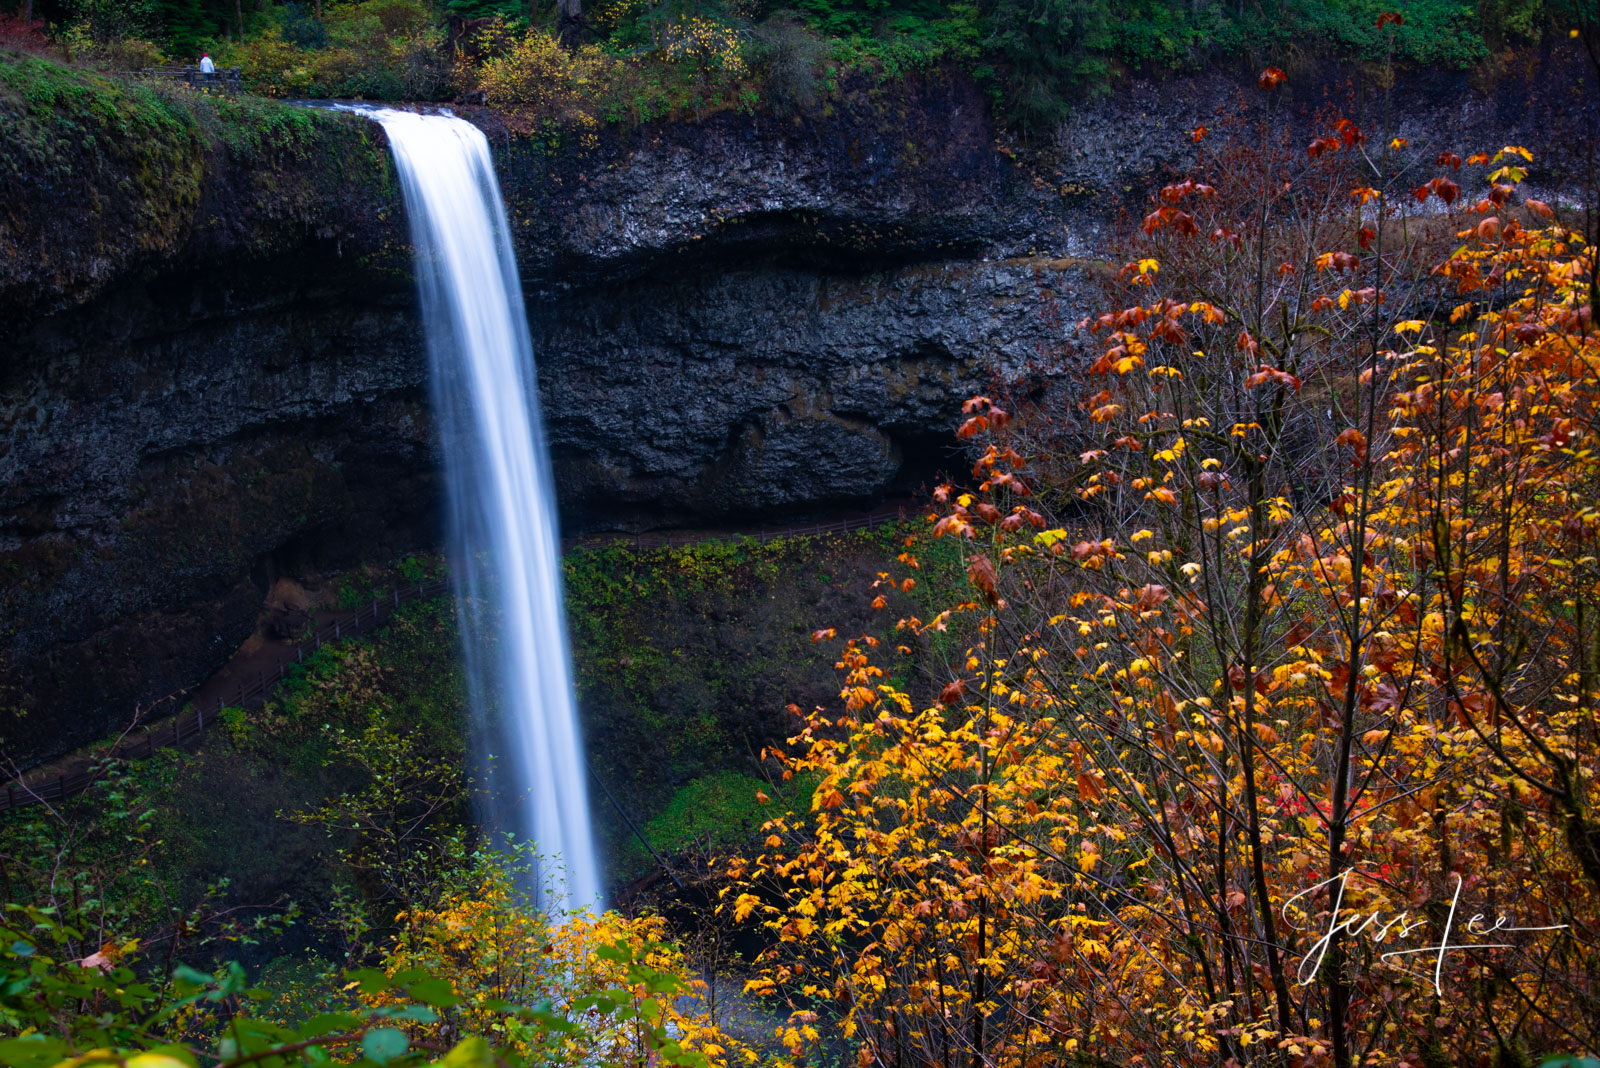 Silver falls in Autumn, A limited edition of 100 prints. Beautify your walls with is lovely prints by ordering today.